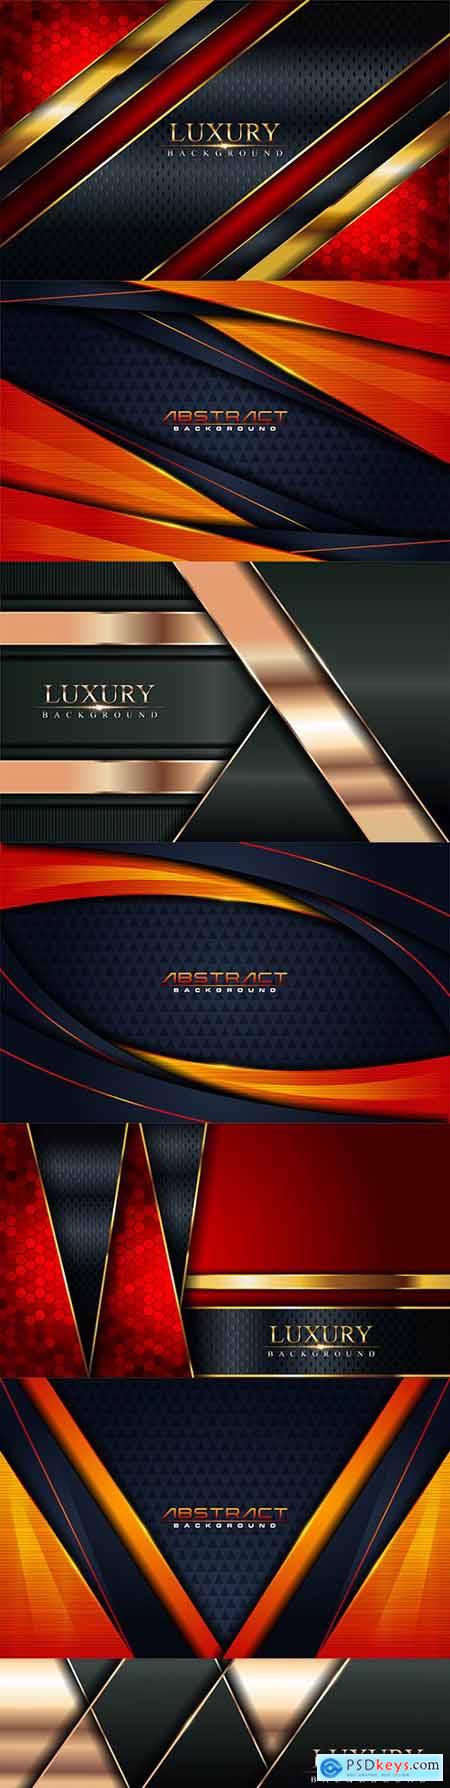 Luxury background and gold design element 22